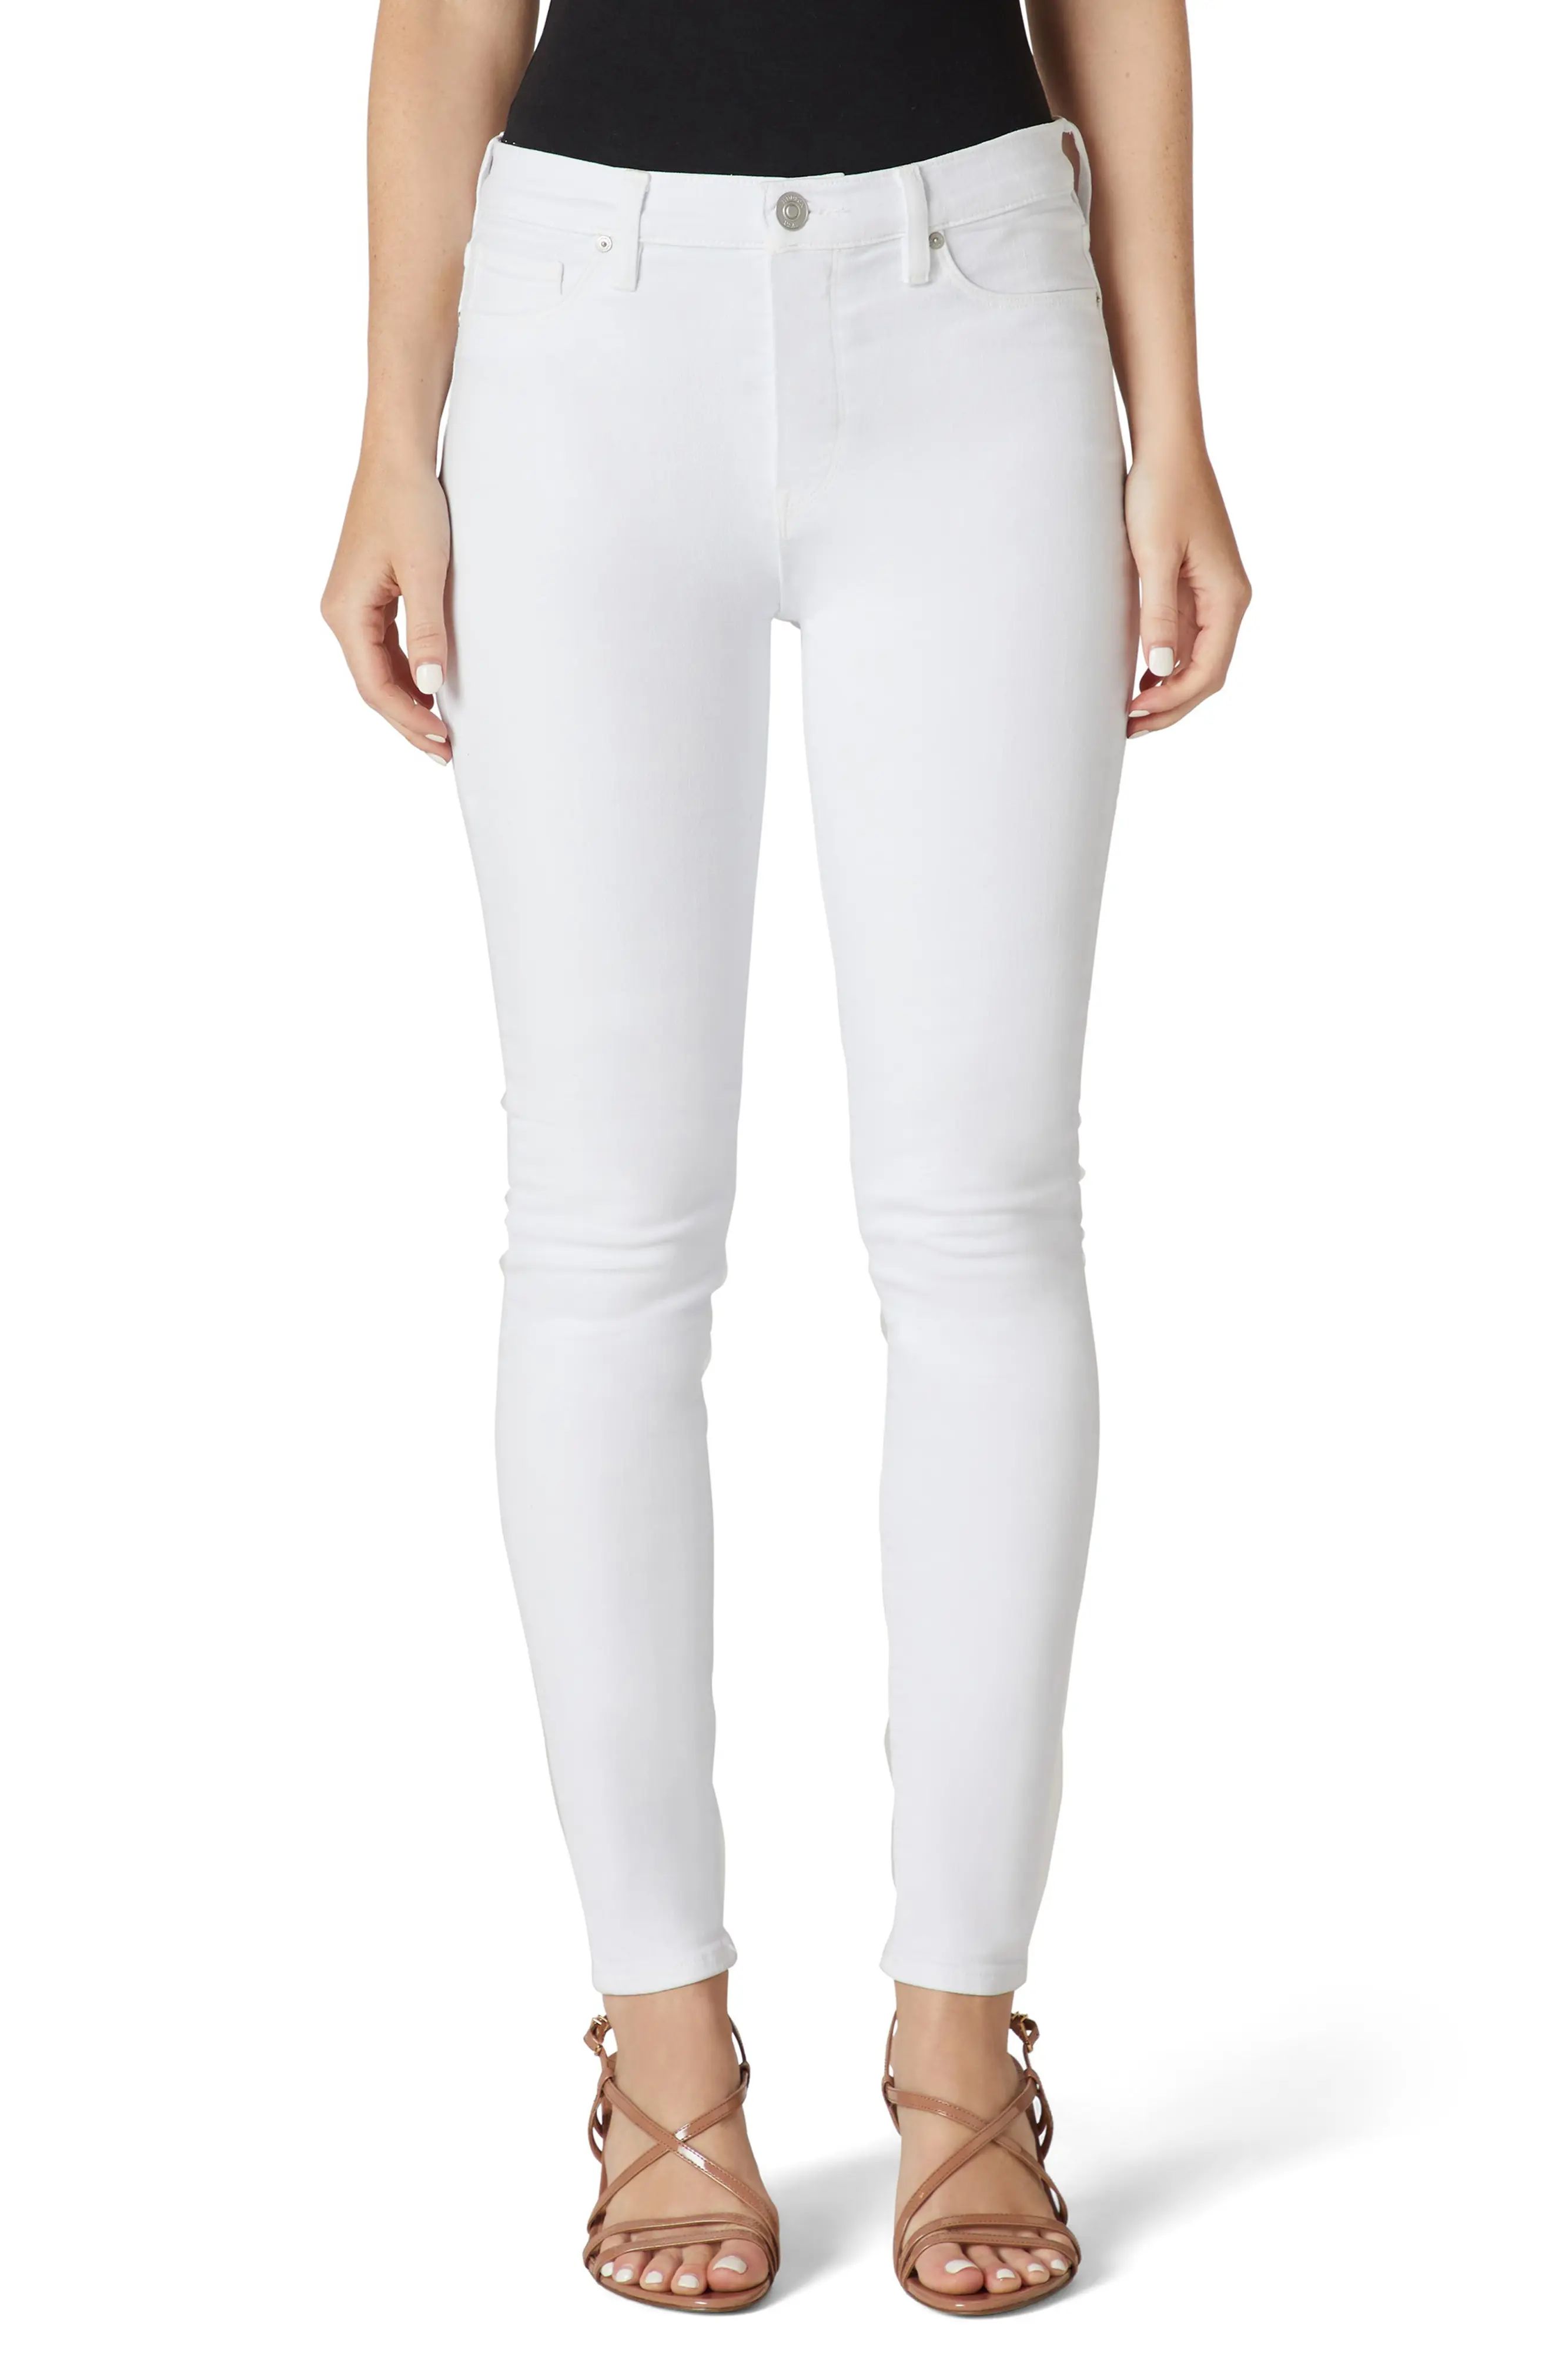 Women's Hudson Jeans Barbara High Waist Sustainable Skinny Jeans, Size 24 - White | Nordstrom